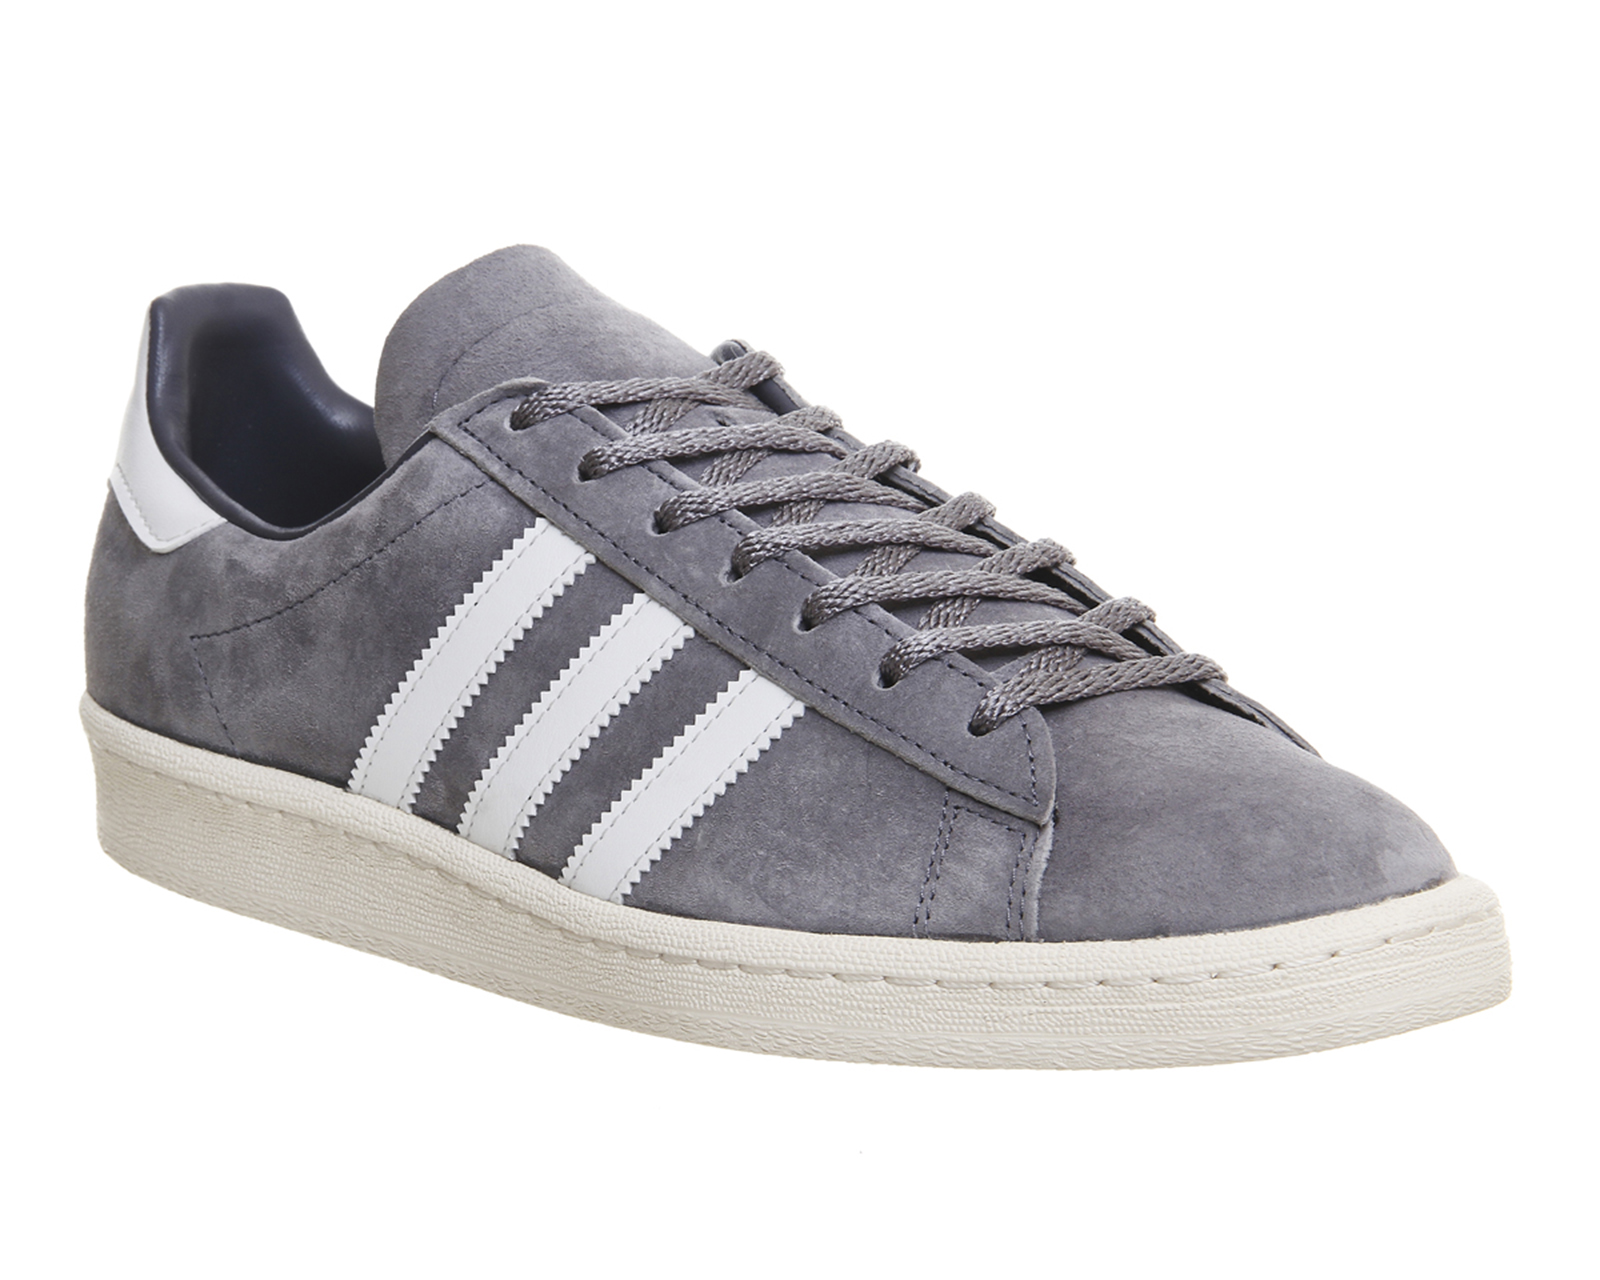 adidas Campus 80s Grey White Vintage Jp - His trainers